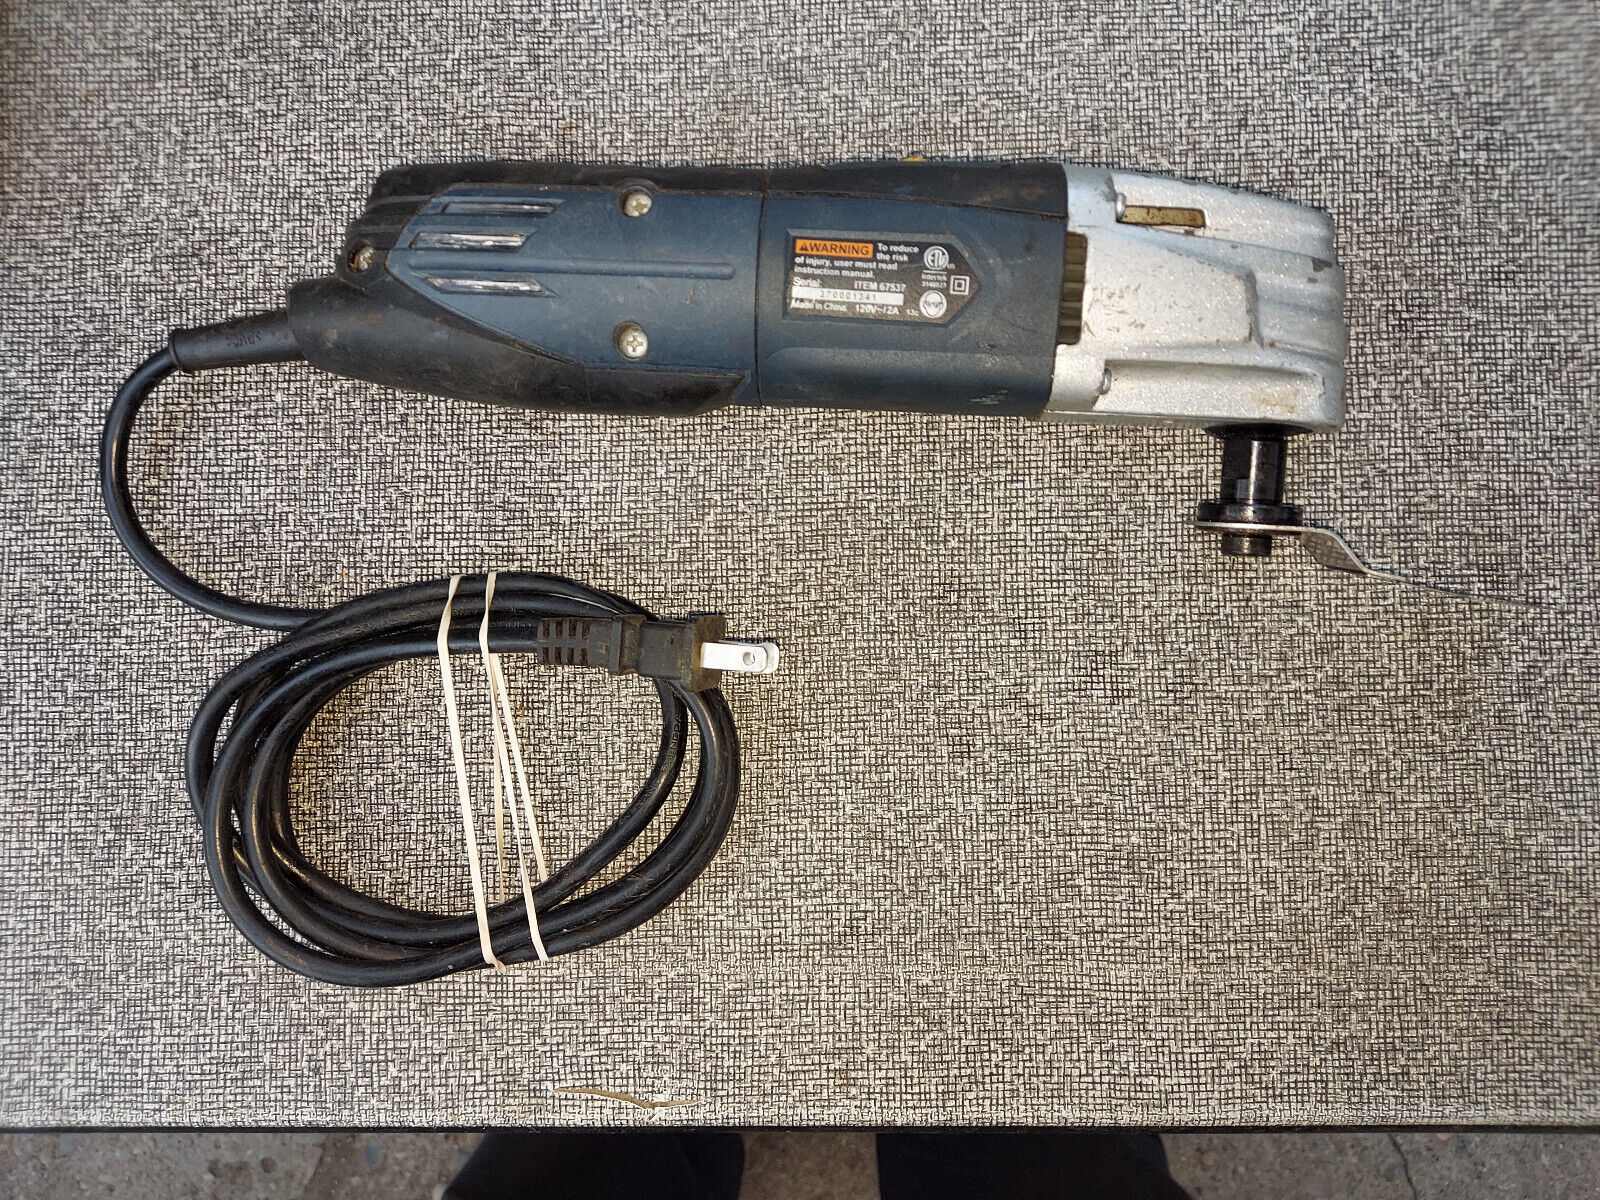 22NN28 CHICAGO ELECTRIC MULTITOOL OSCILLATING TOOL, #67537, 120V 2A, 6MM HEX, GC - $13.95